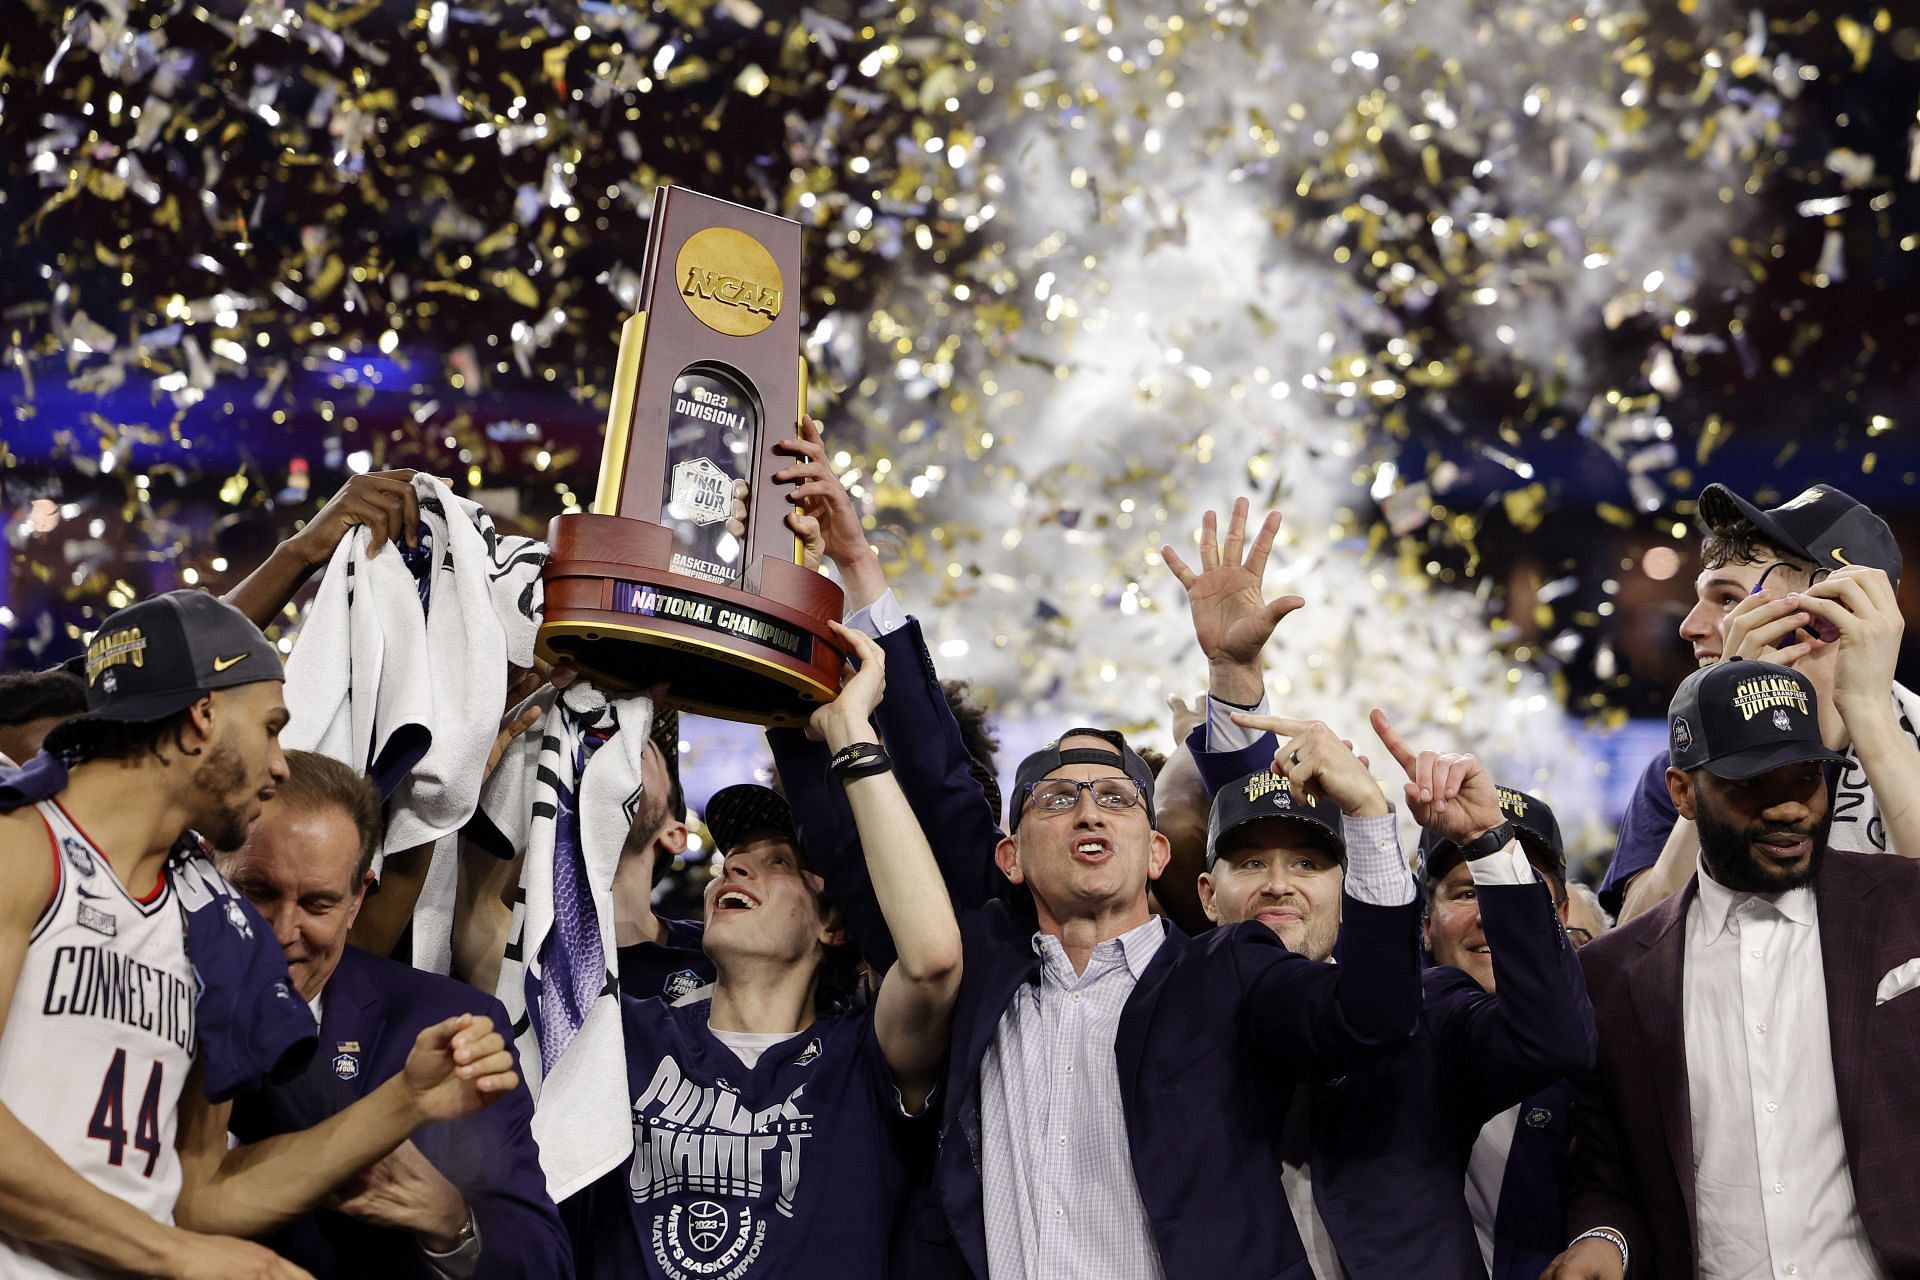 UConn is looking to win back-to-back national championships.